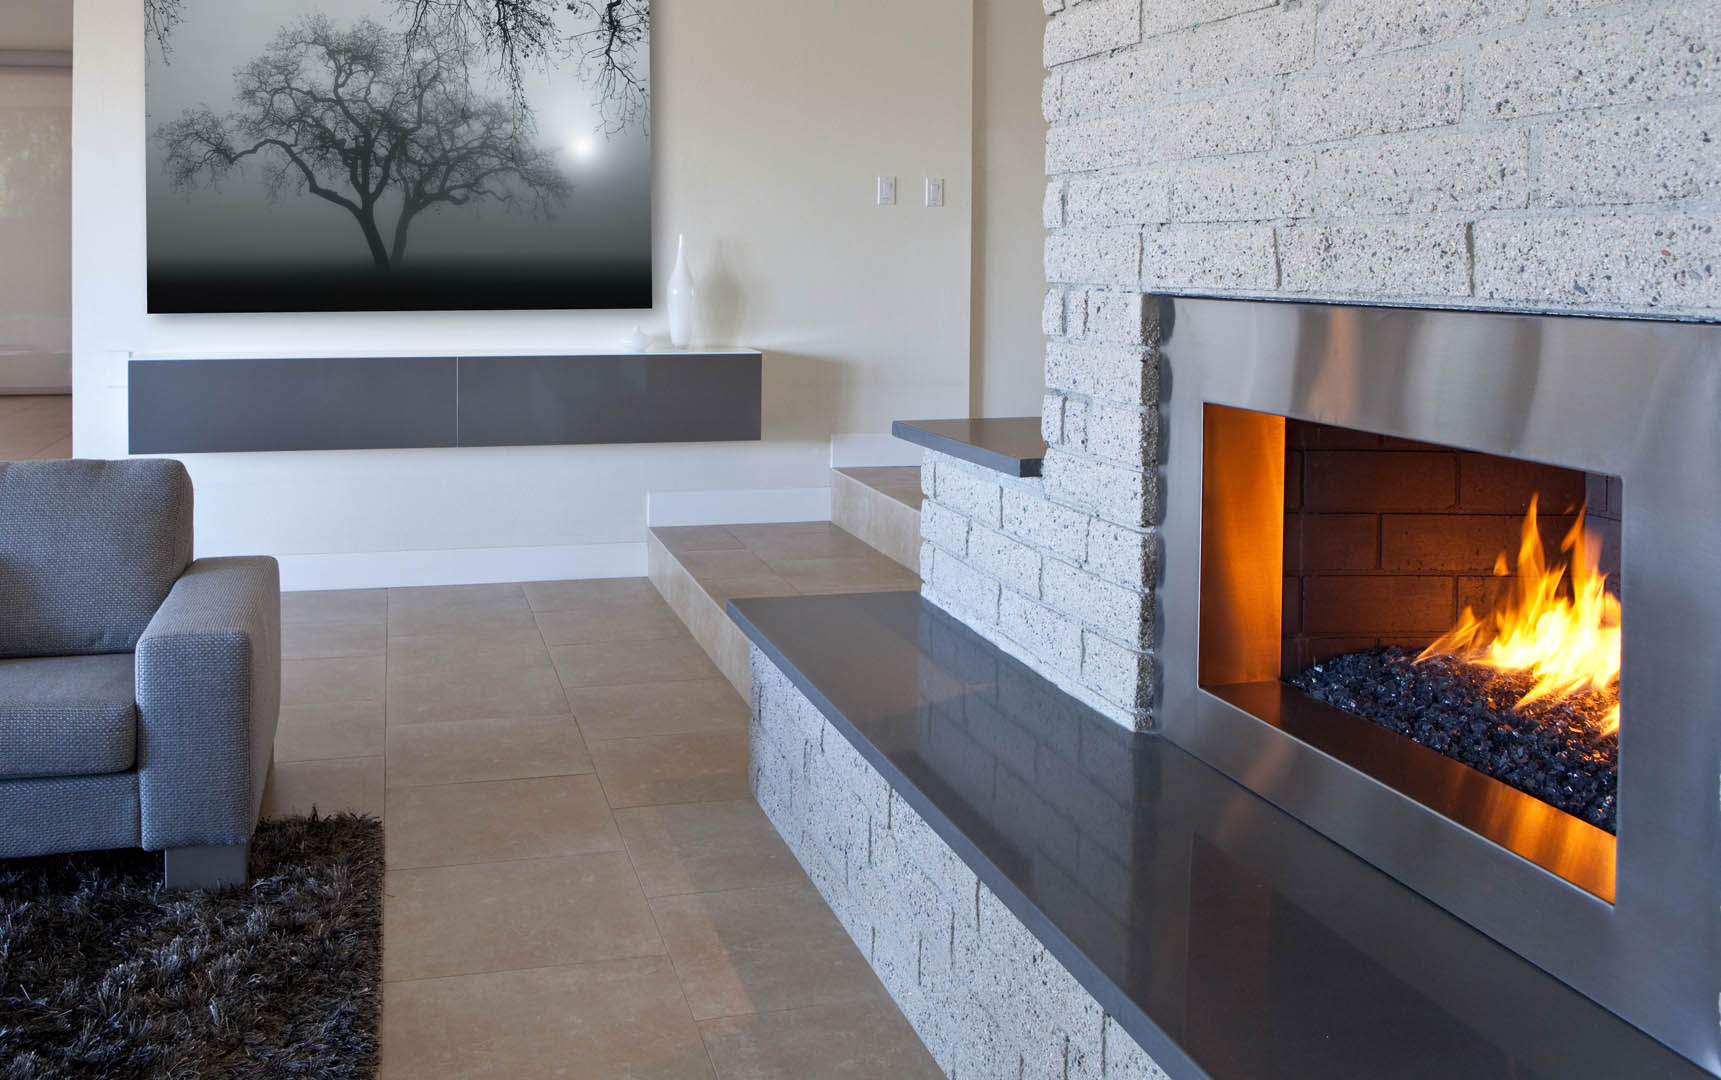 A fireplace with a fire place in the middle of it